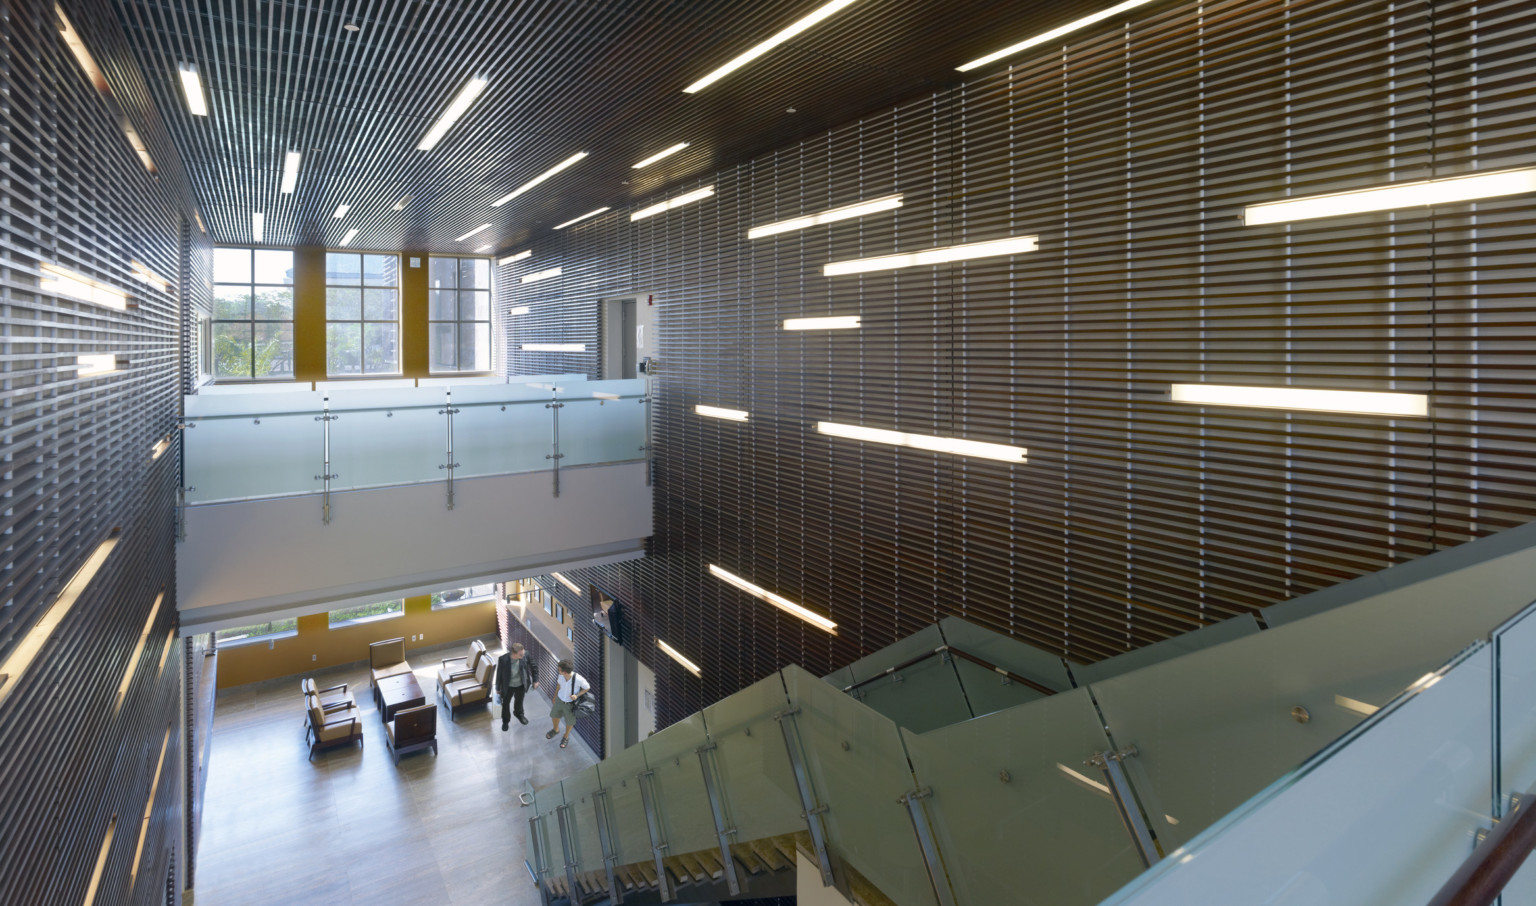 interior view looking down to lower level of U.S. Consulate in Surabaya, Indonesia with linear light features